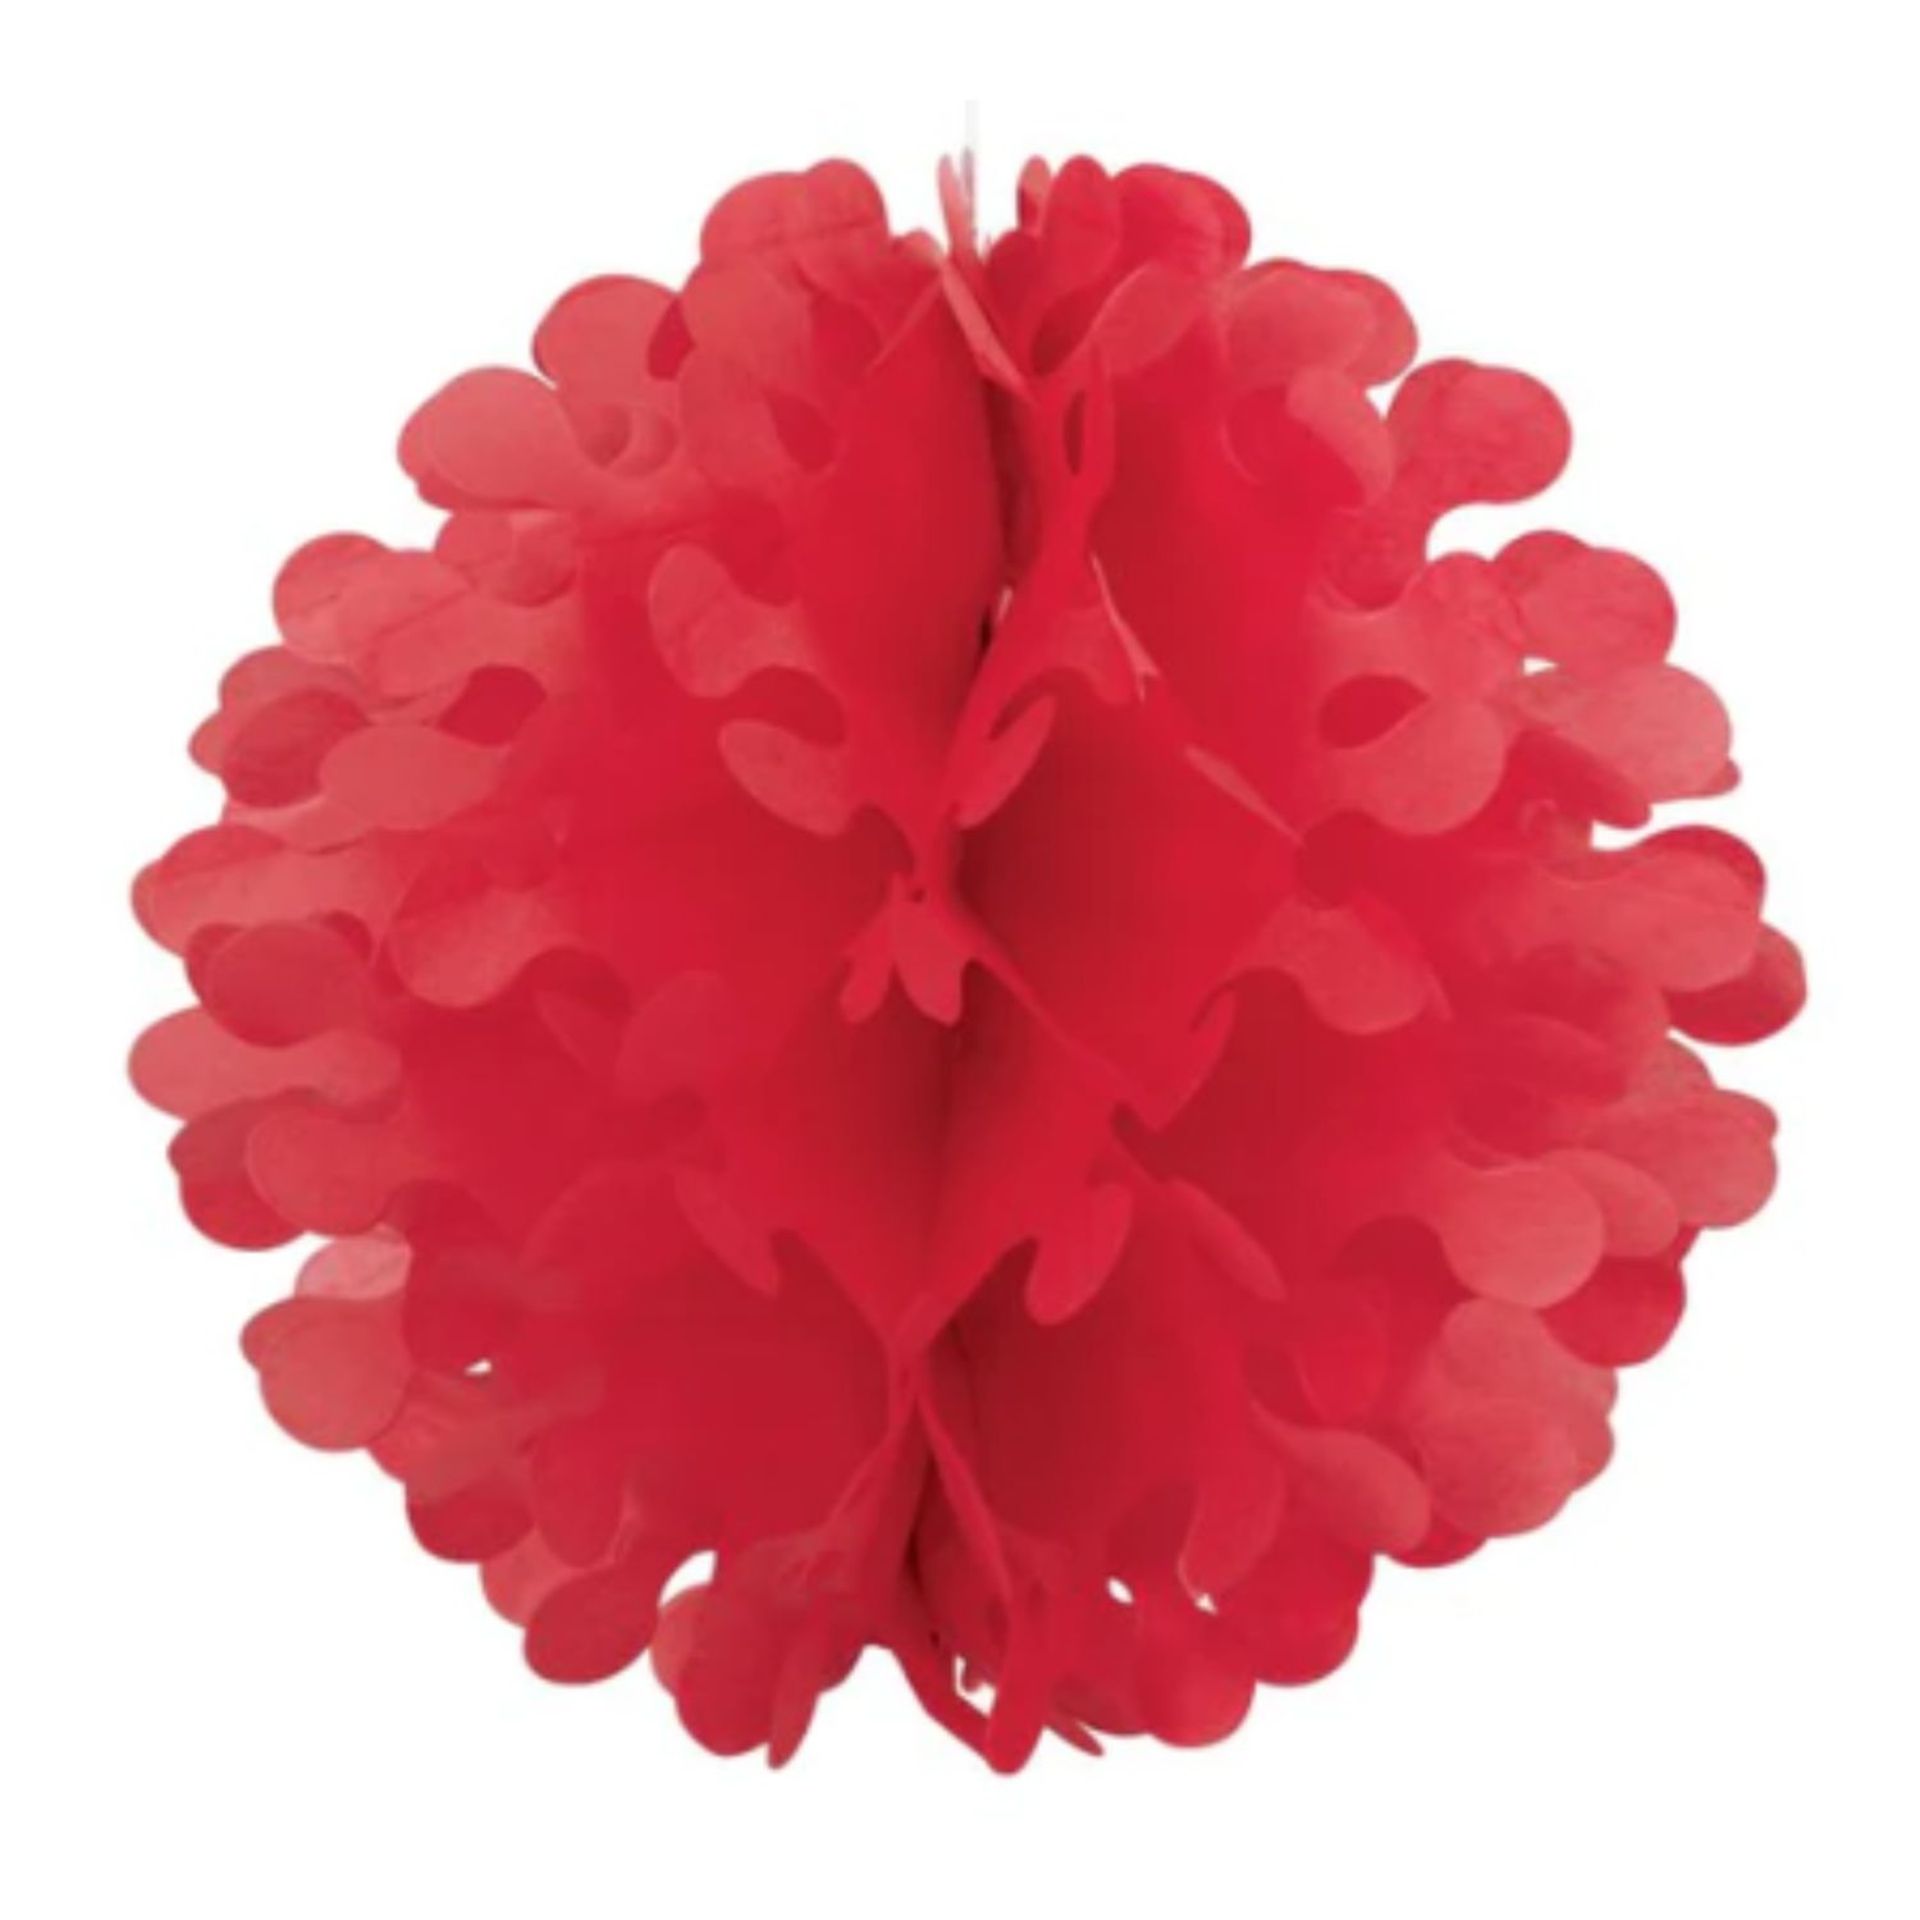 1000 PARTY SUPPLIES 12" FLUTTER TISSUE PAPER BALL - RANGE OF COLOURS, RRP £10,000 - Image 3 of 9